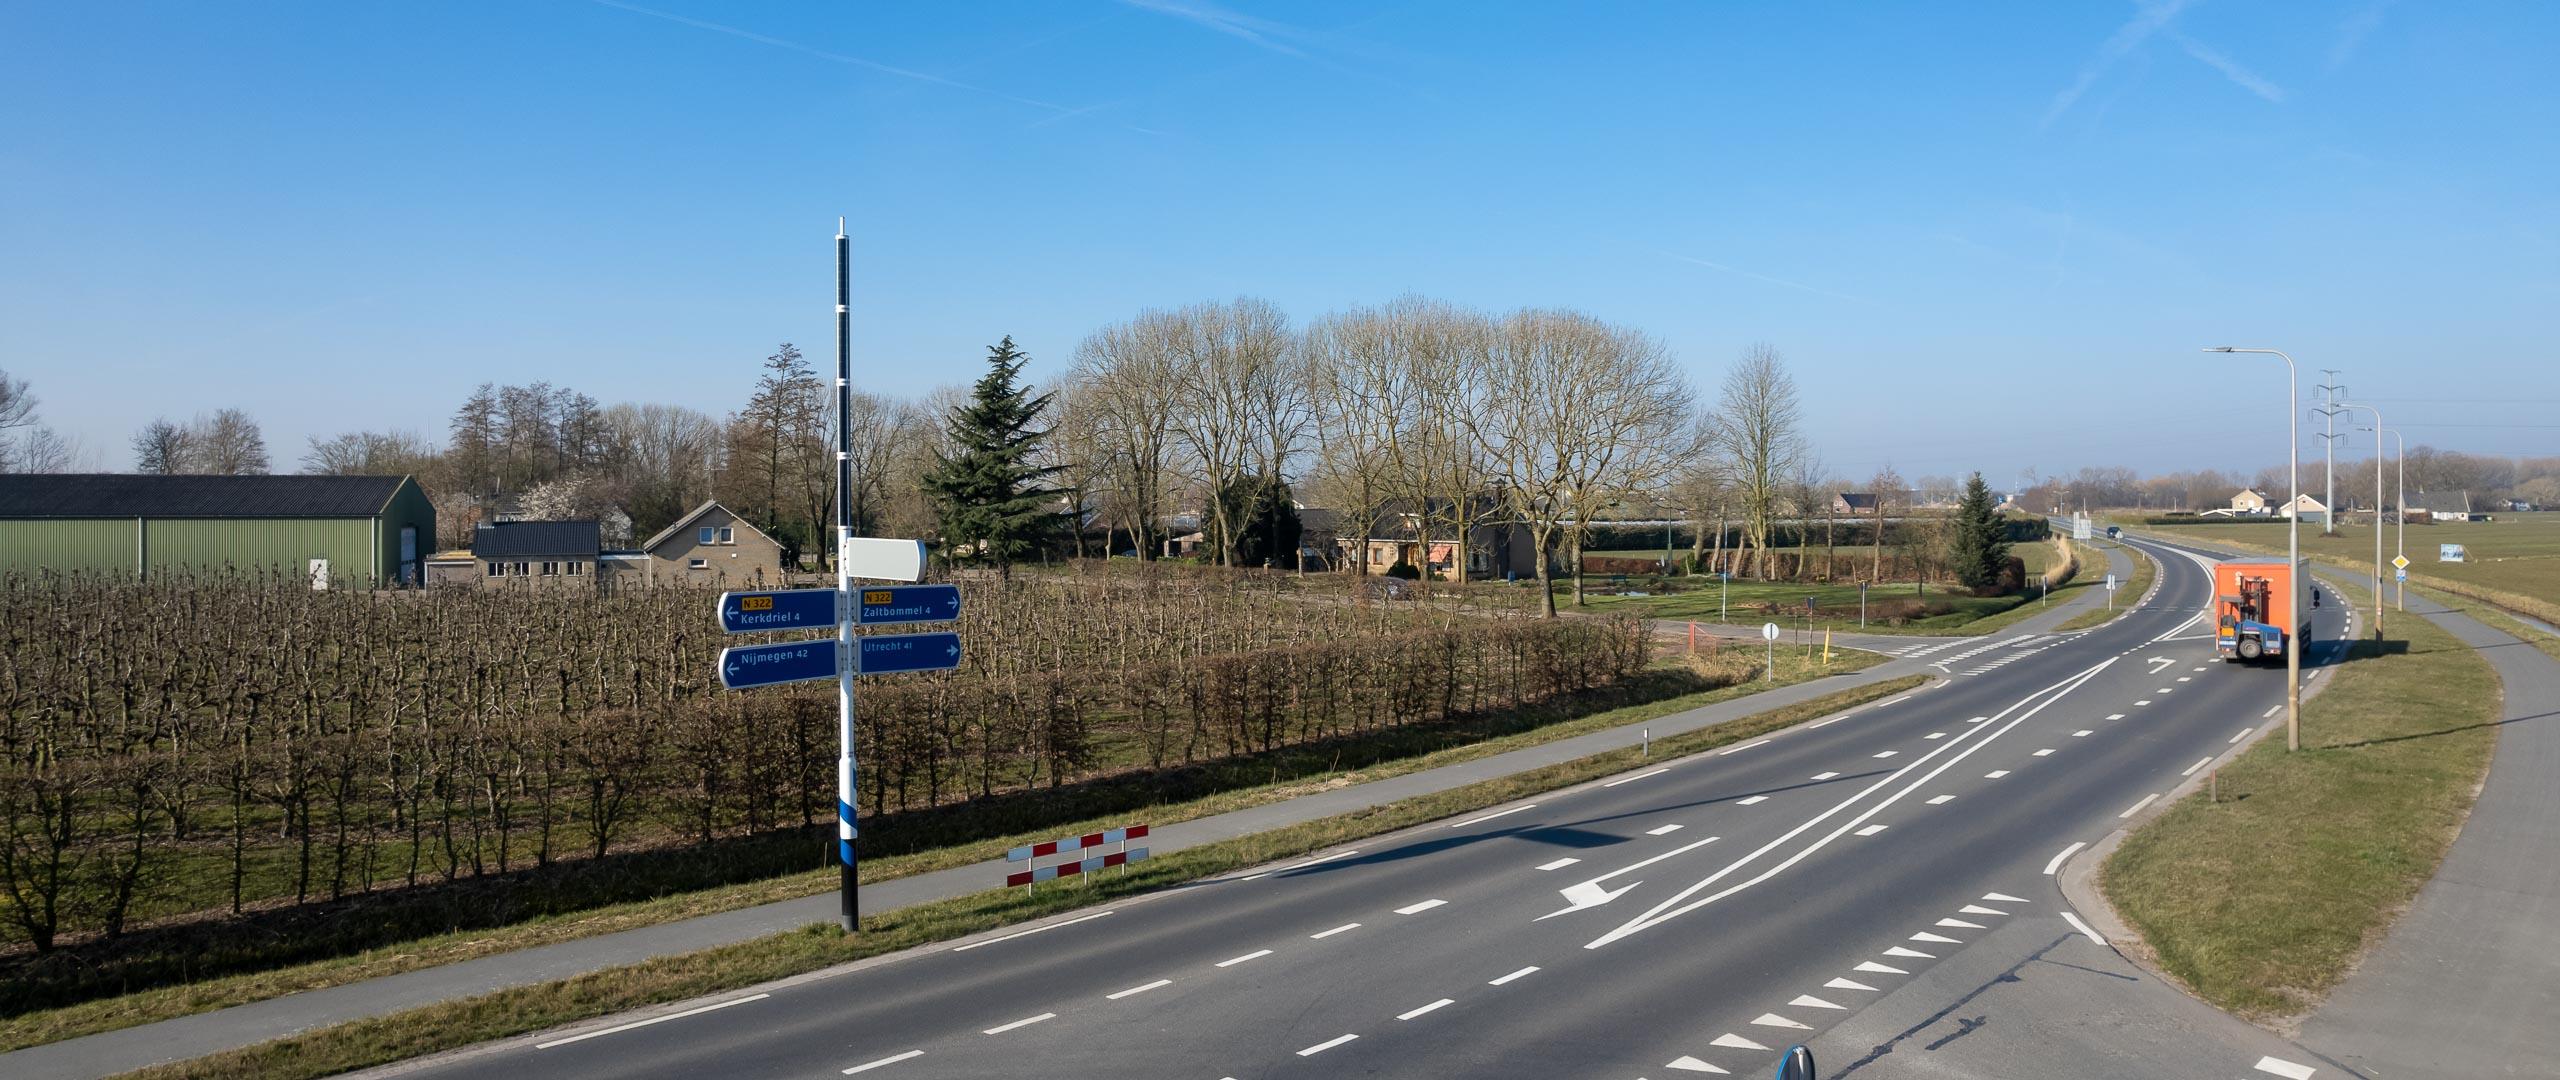 The Soluxio solar illuminated road sign post at intersection in the Netherlands